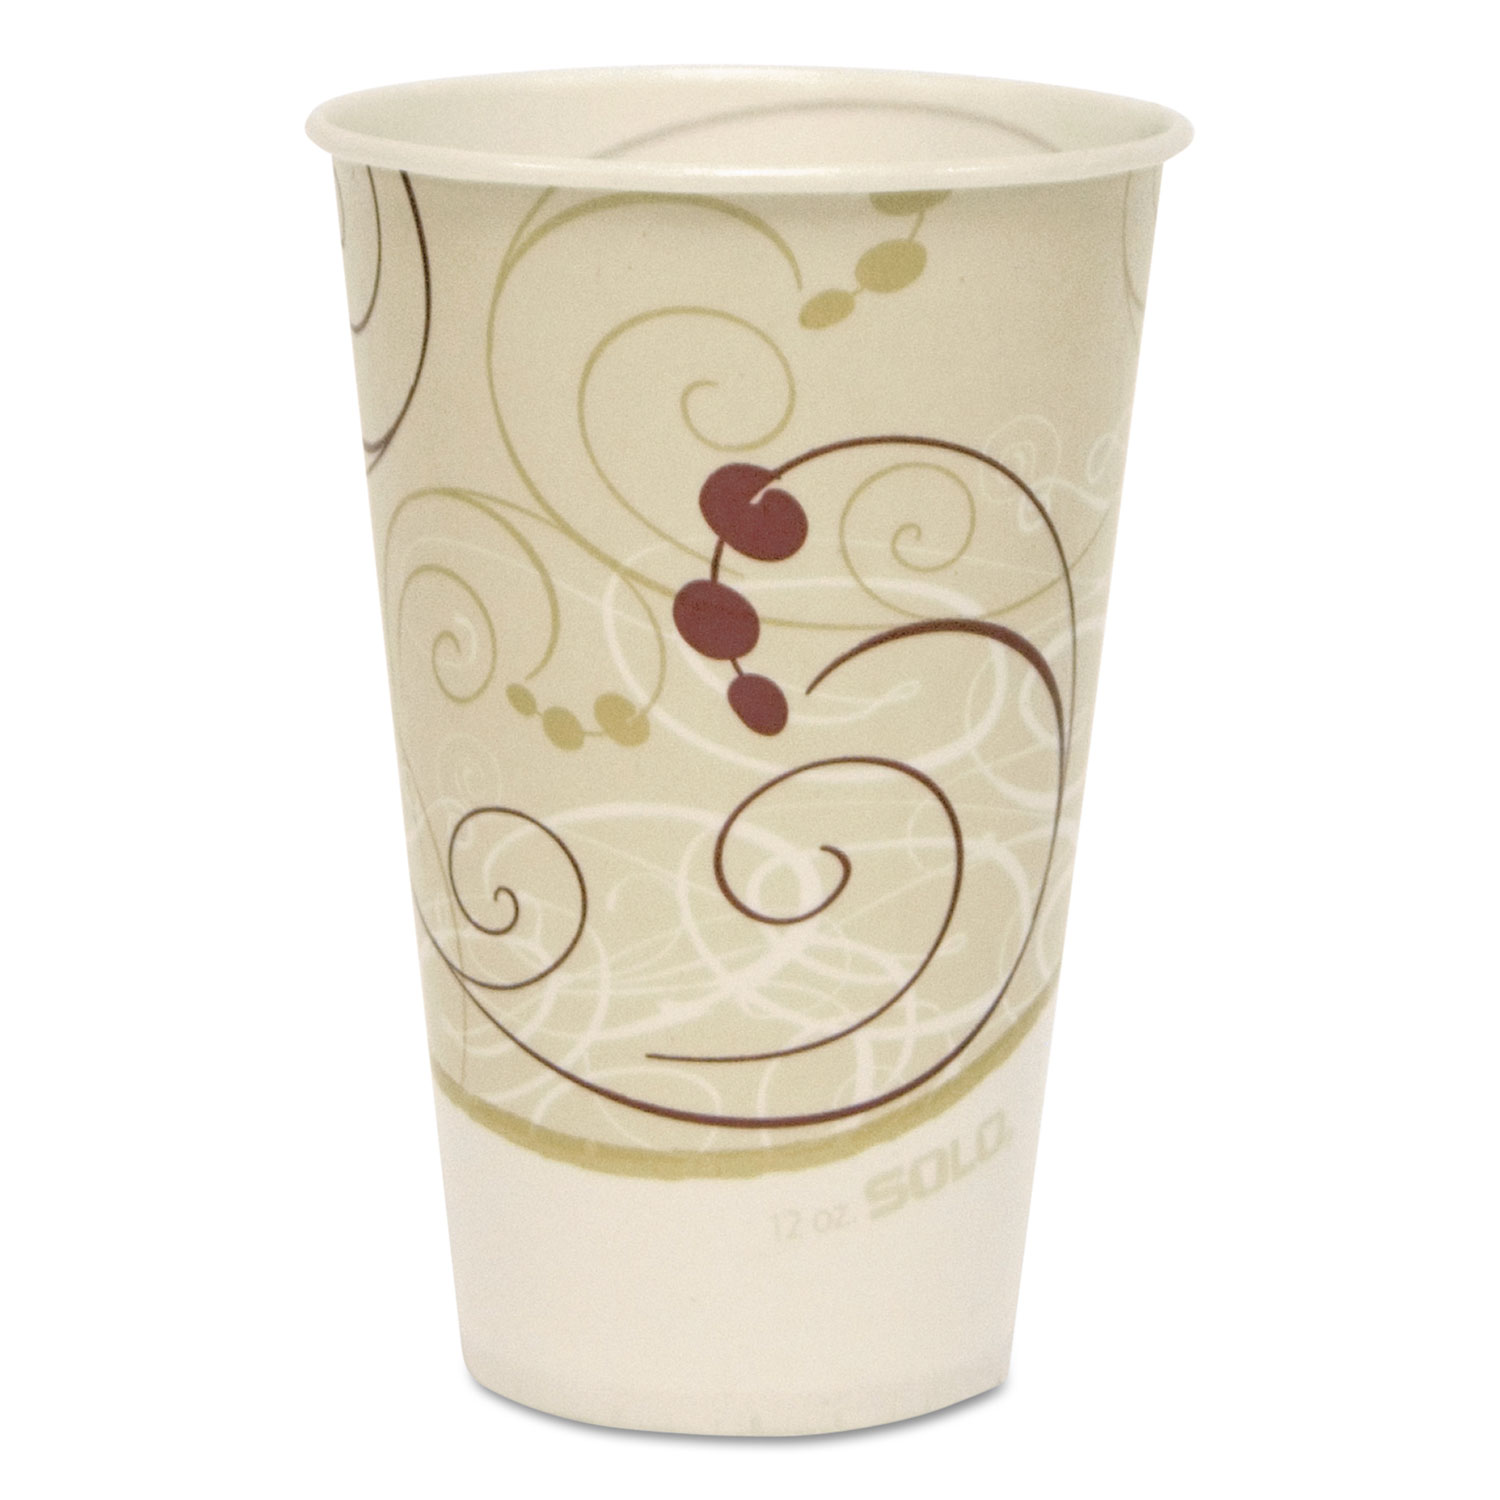 Solo Symphony Treated-Paper Cold Cups, 12 oz, White/Beige/Red, 100/Bag, 20 Bags/Carton